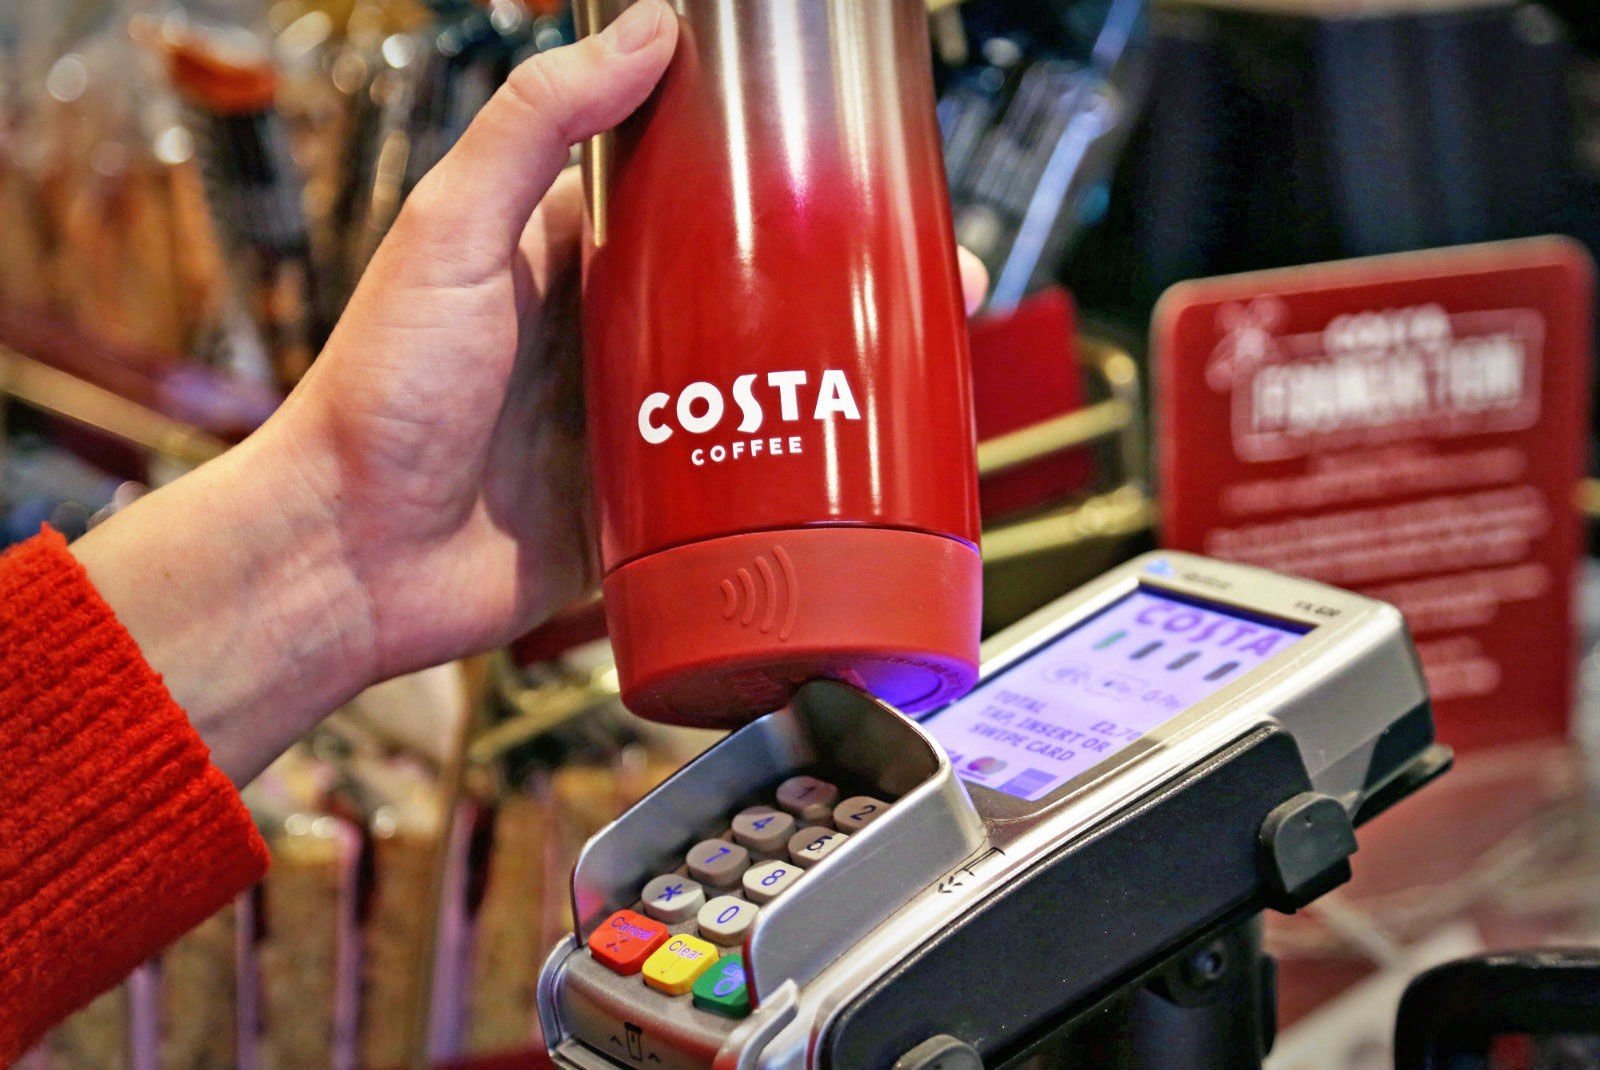 Reusable coffee cups with contactless chip (bPay) offers solution to save the planet